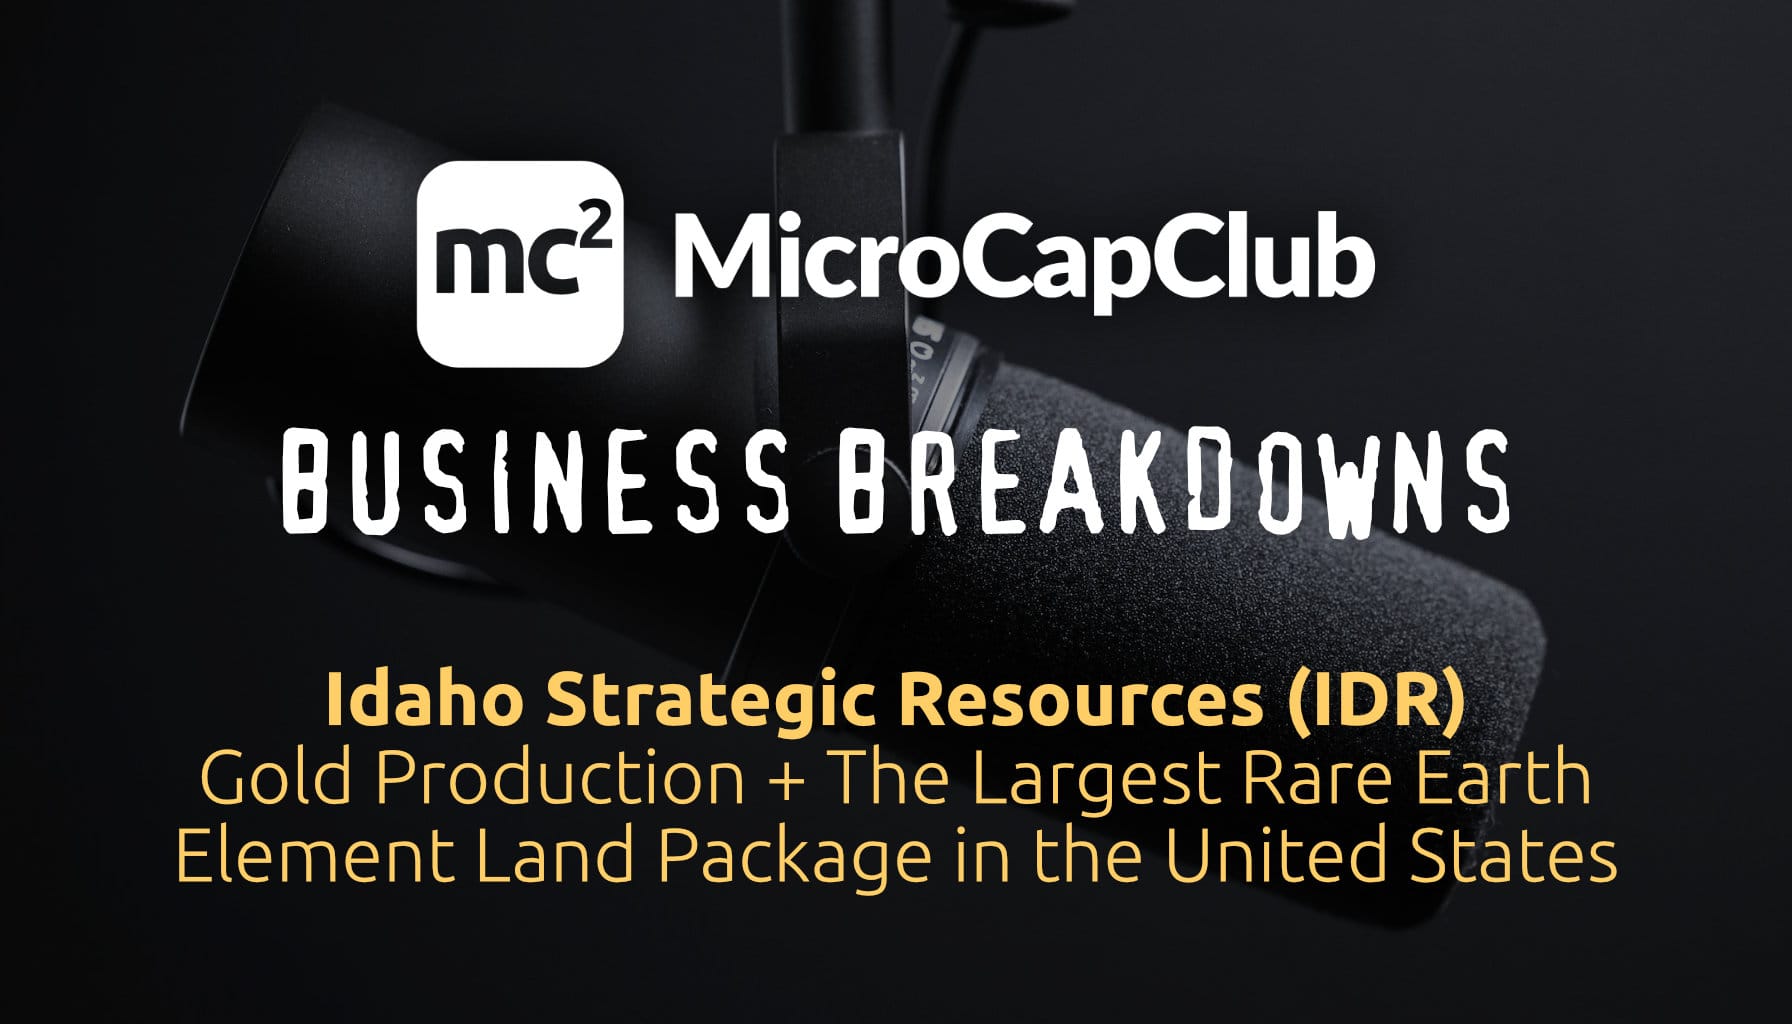 Idaho Strategic Resources (IDR): Gold Production + The Largest Rare Earth Element Land Package in the United States